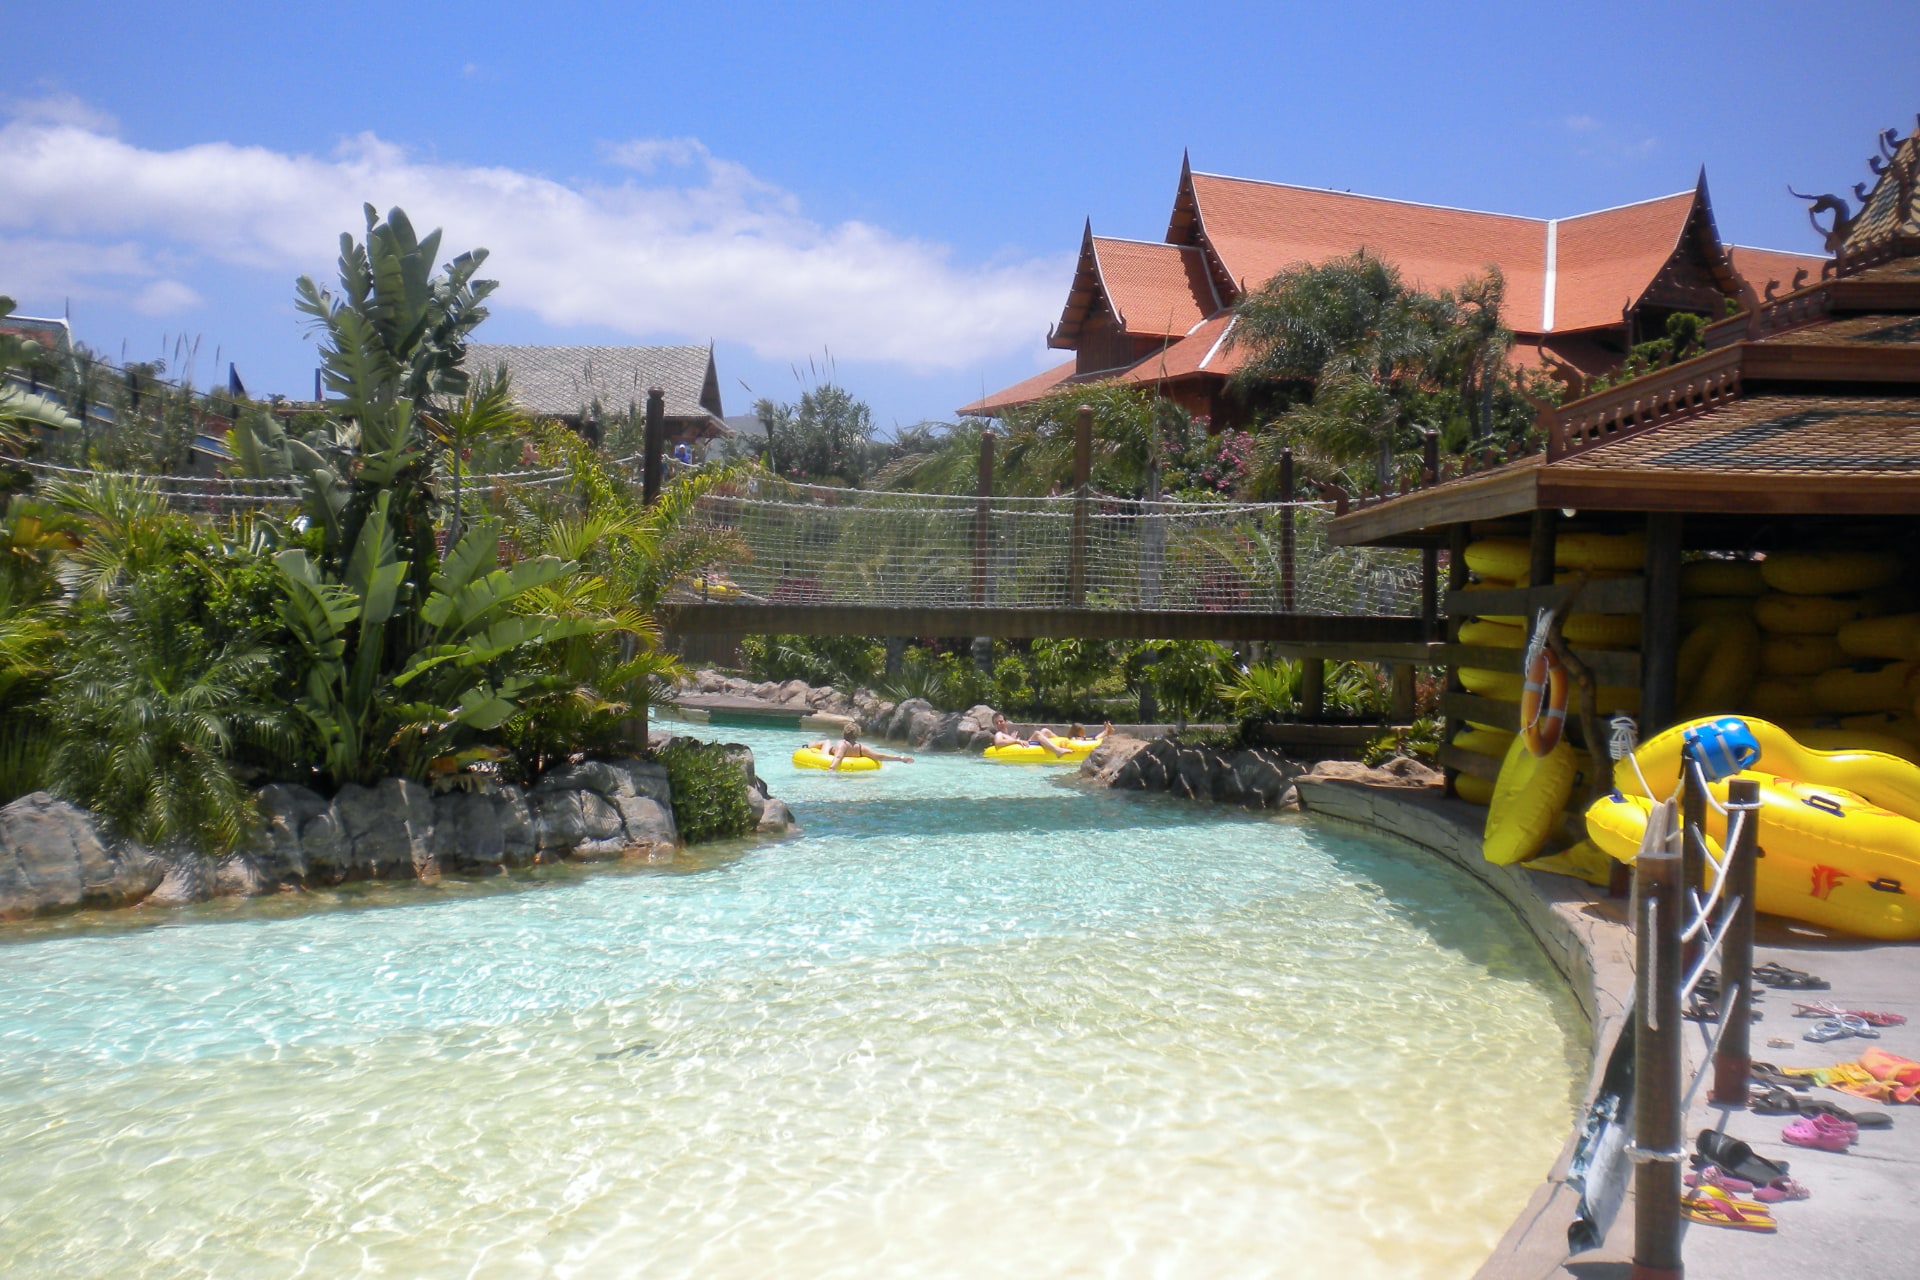 Bridge under the lazy river at Siam Park, Tenerife, offering a unique perspective and passage through the park's water attractions